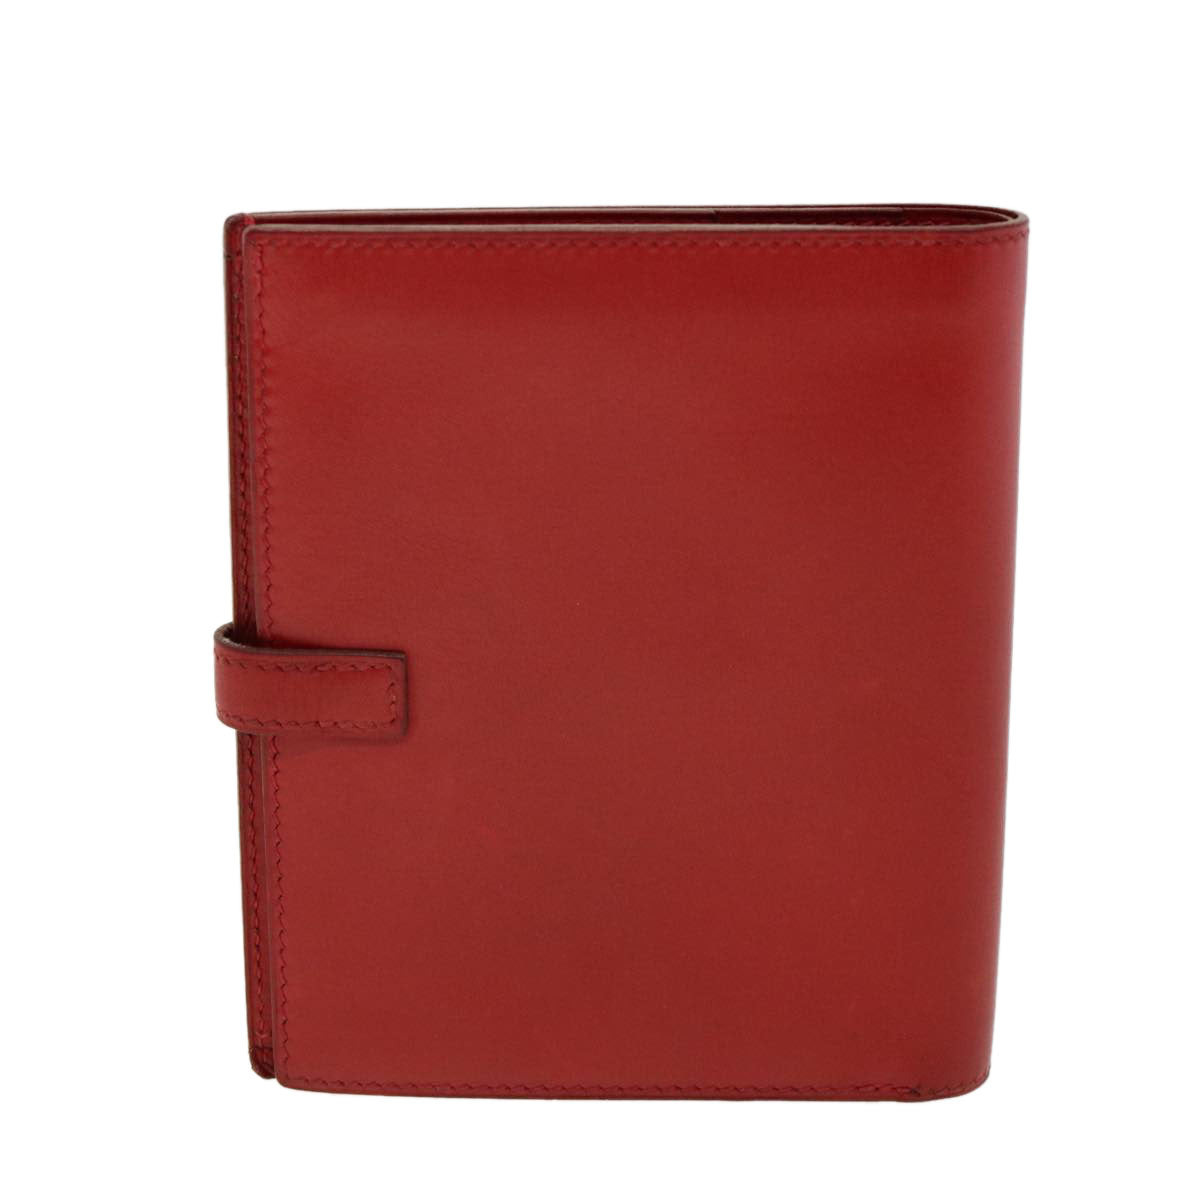 HERMES Saumur Diane Compact Wallet Leather Red Auth 30923 - 0